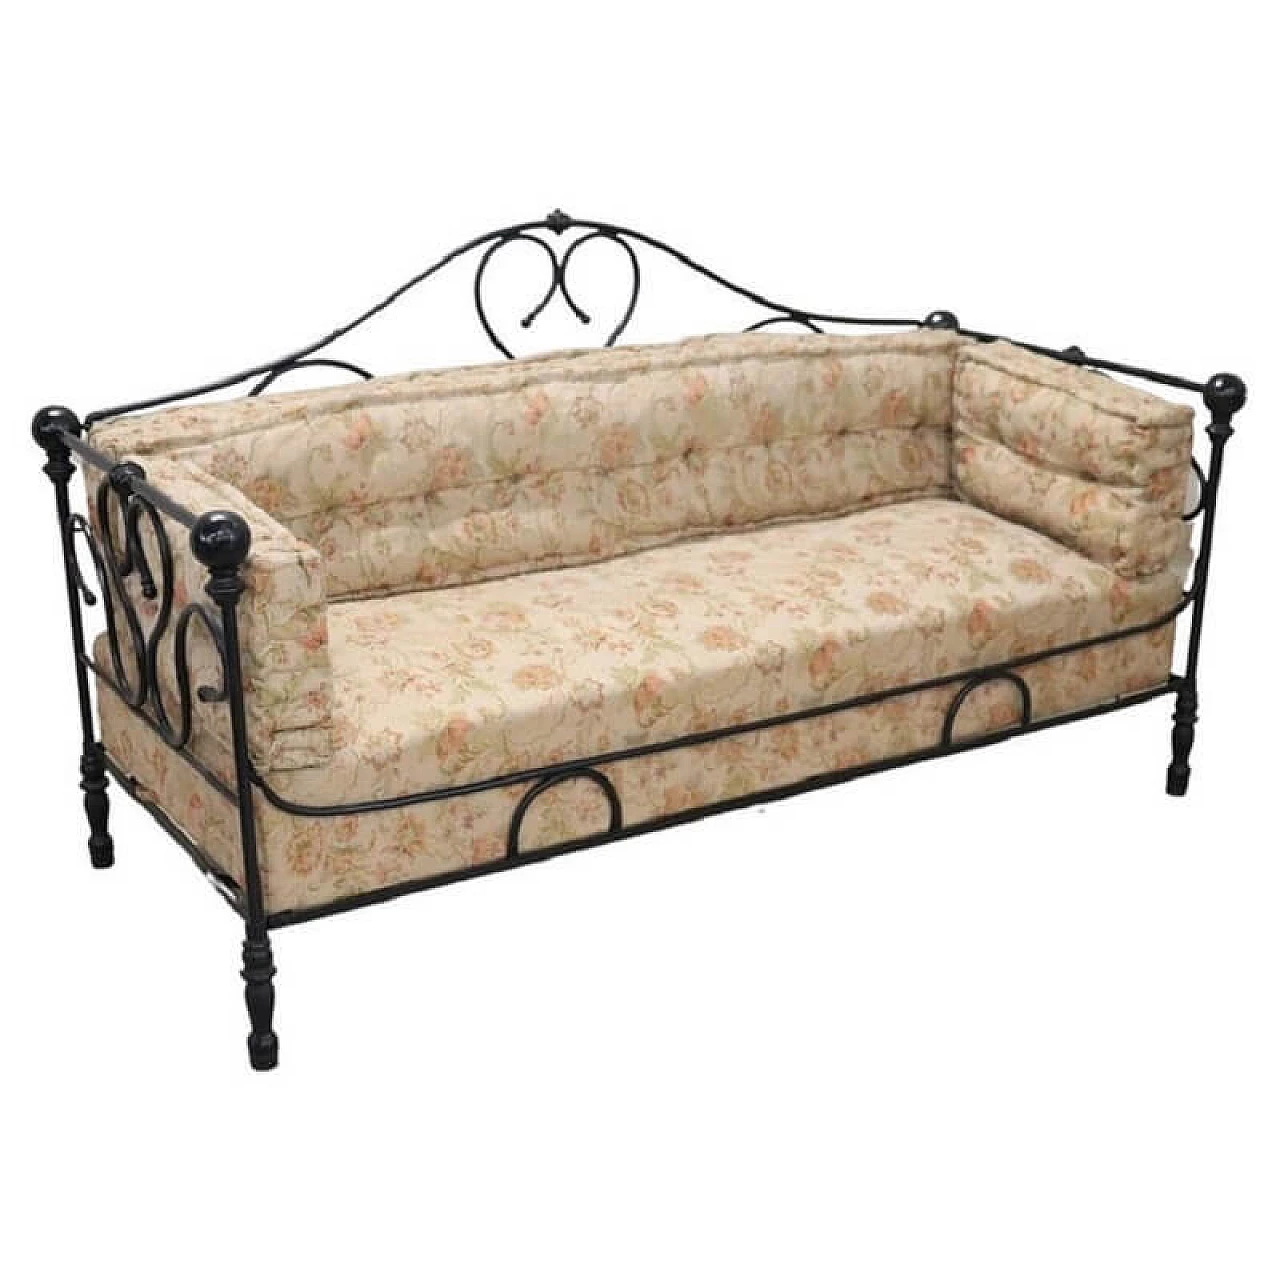 Wrought iron sofa with curl and scroll decoration, late 19th century 1